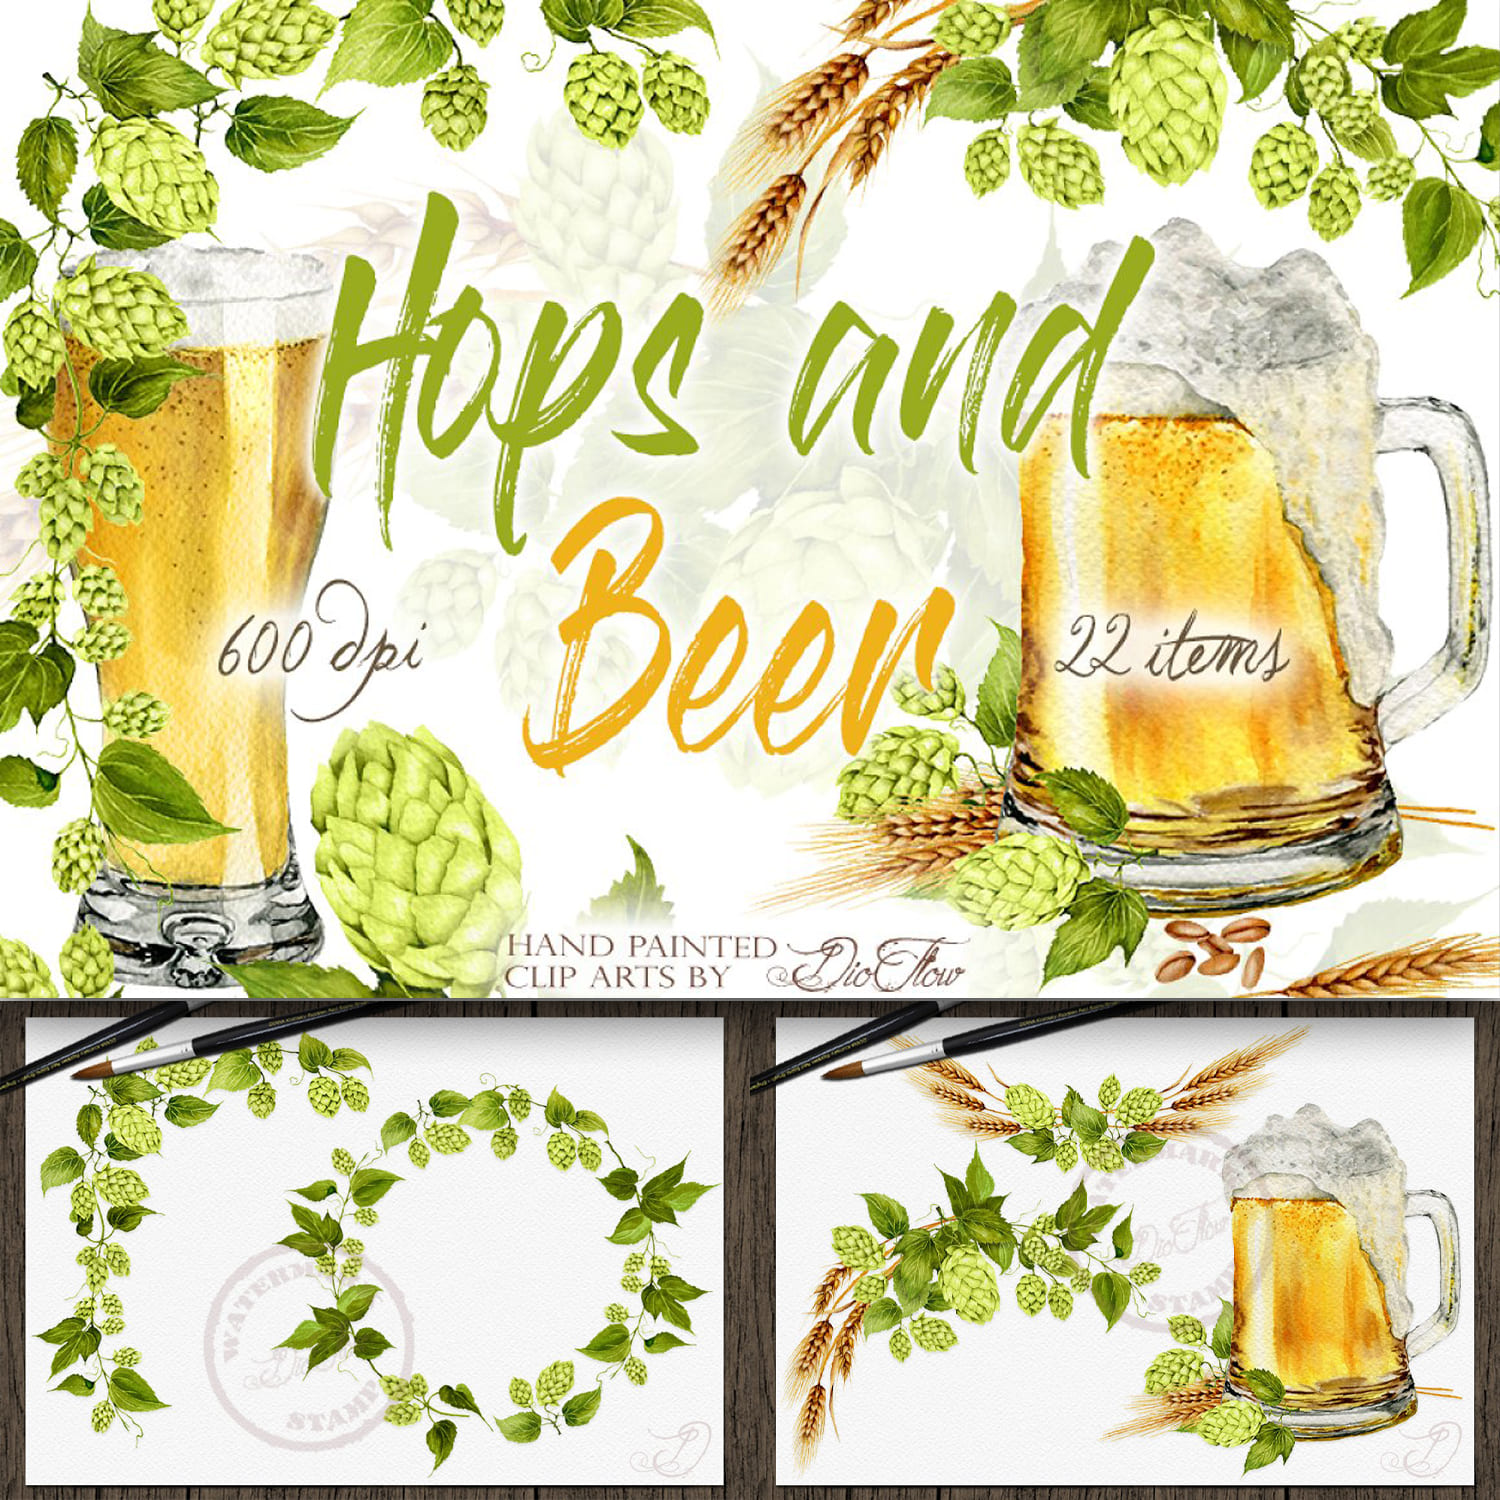 Hops And Beer Watercolor Clip Art cover.